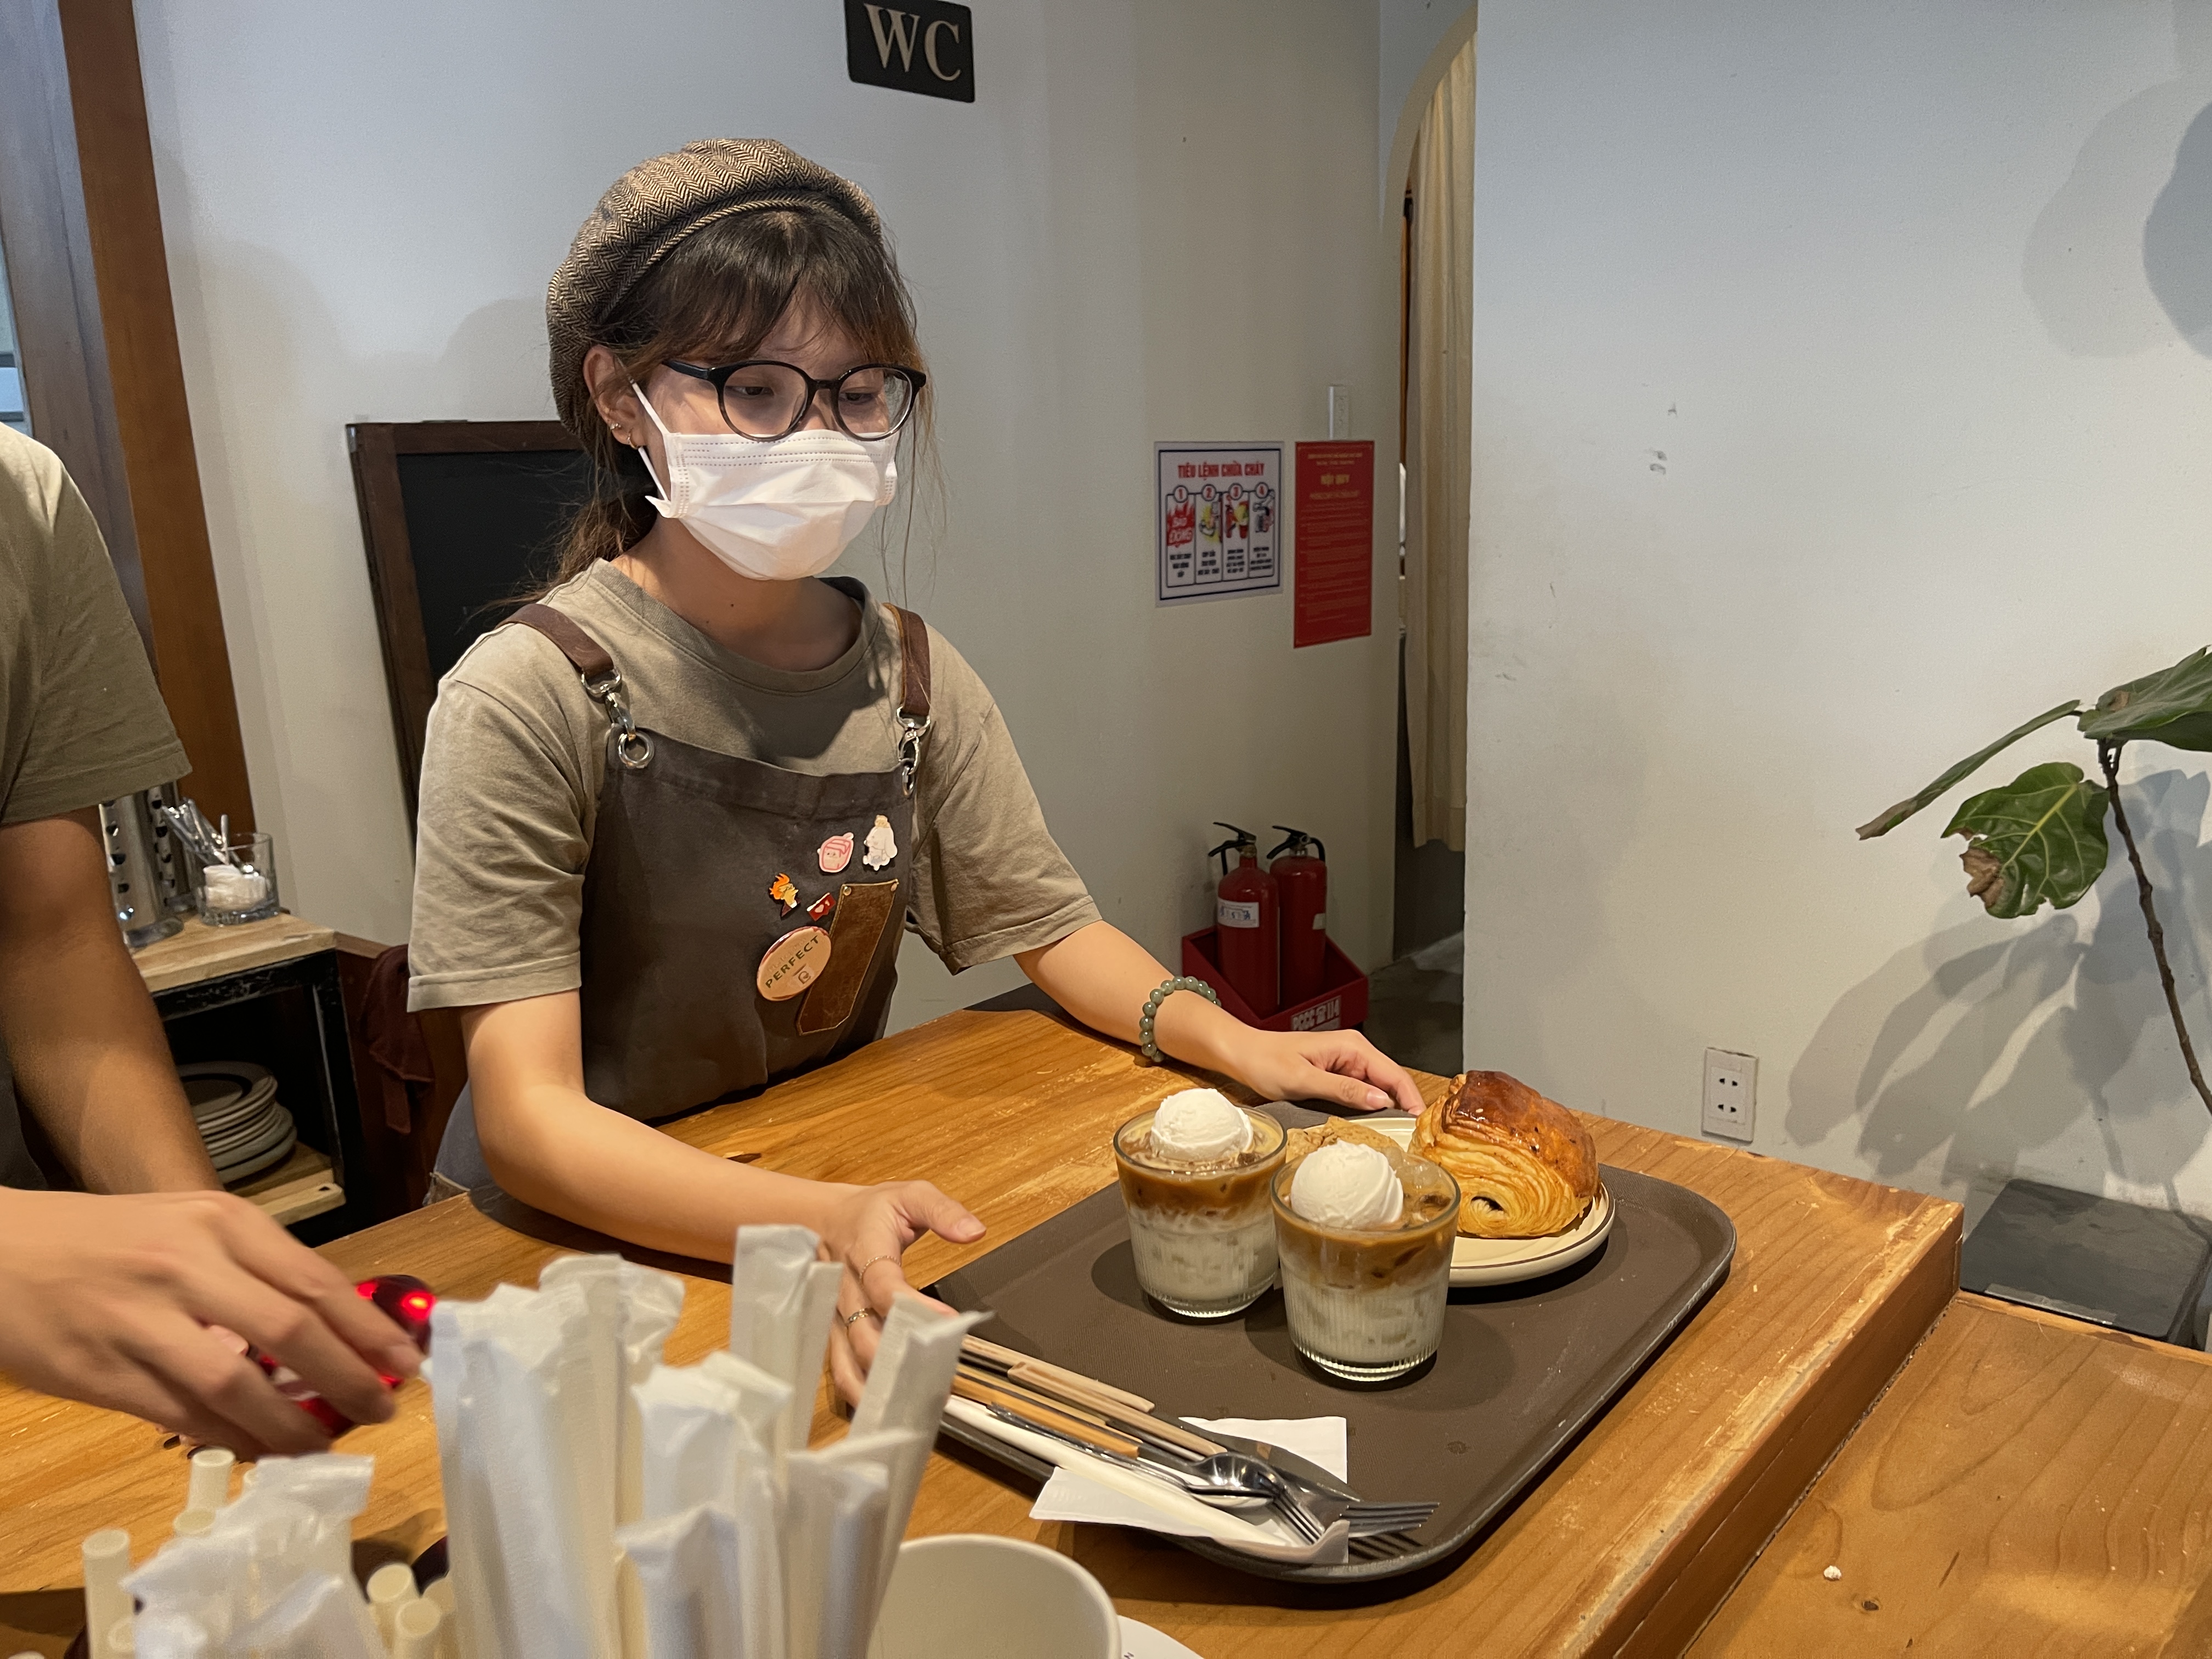 A staff memeber serves beverages and cakes to customers at a coffee shop in Tan Phu District, Ho Chi Minh City. Photo: Dong Nguyen / Tuoi Tre News